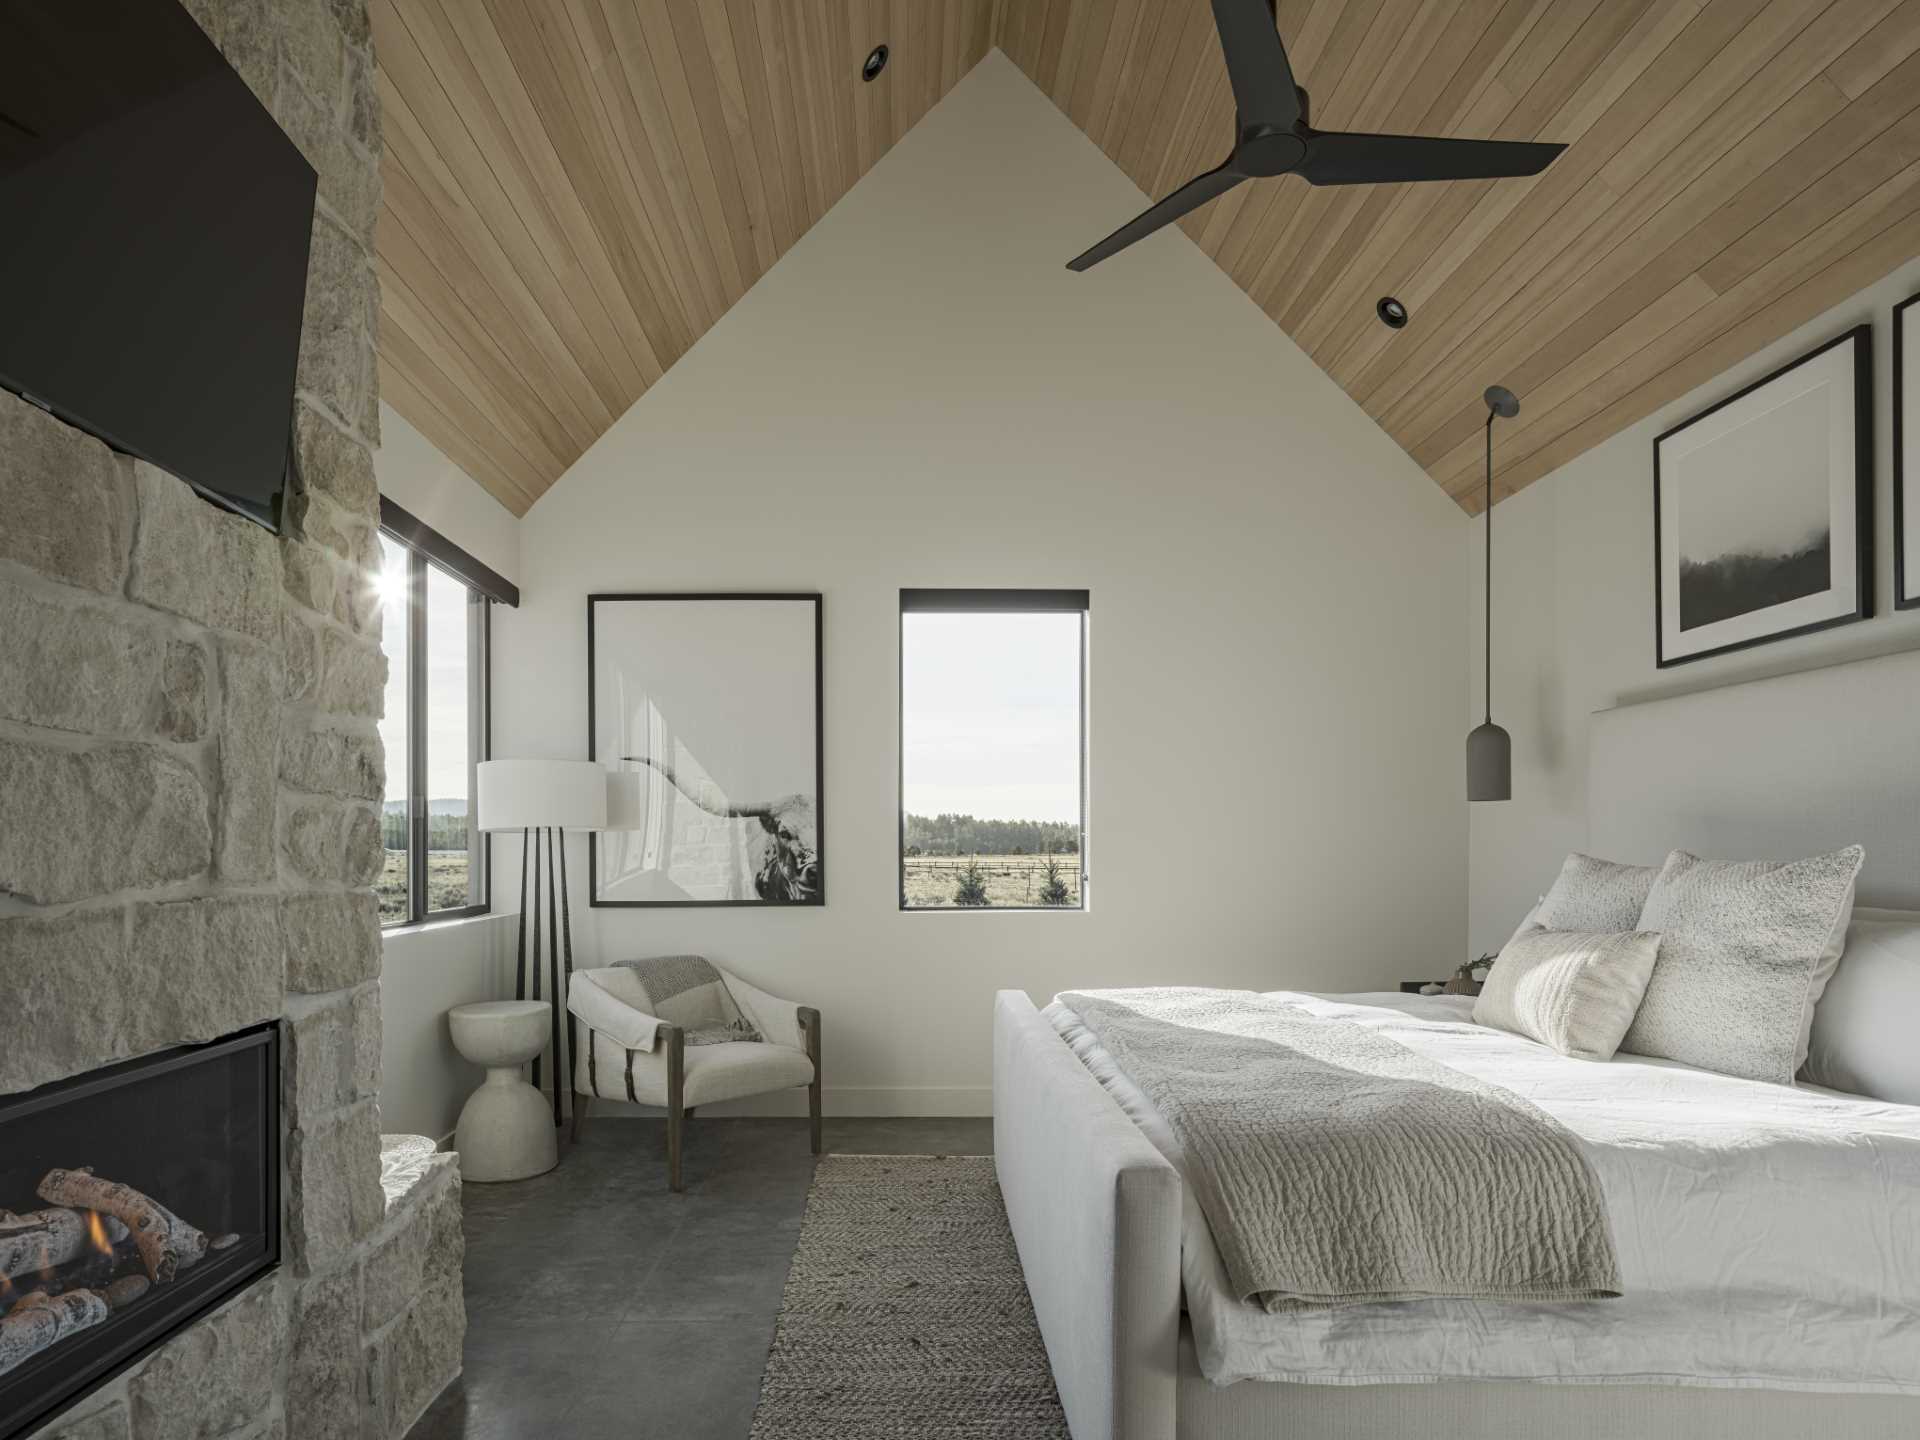 A modern bedroom with a stone wall, fireplace, and mountain views.